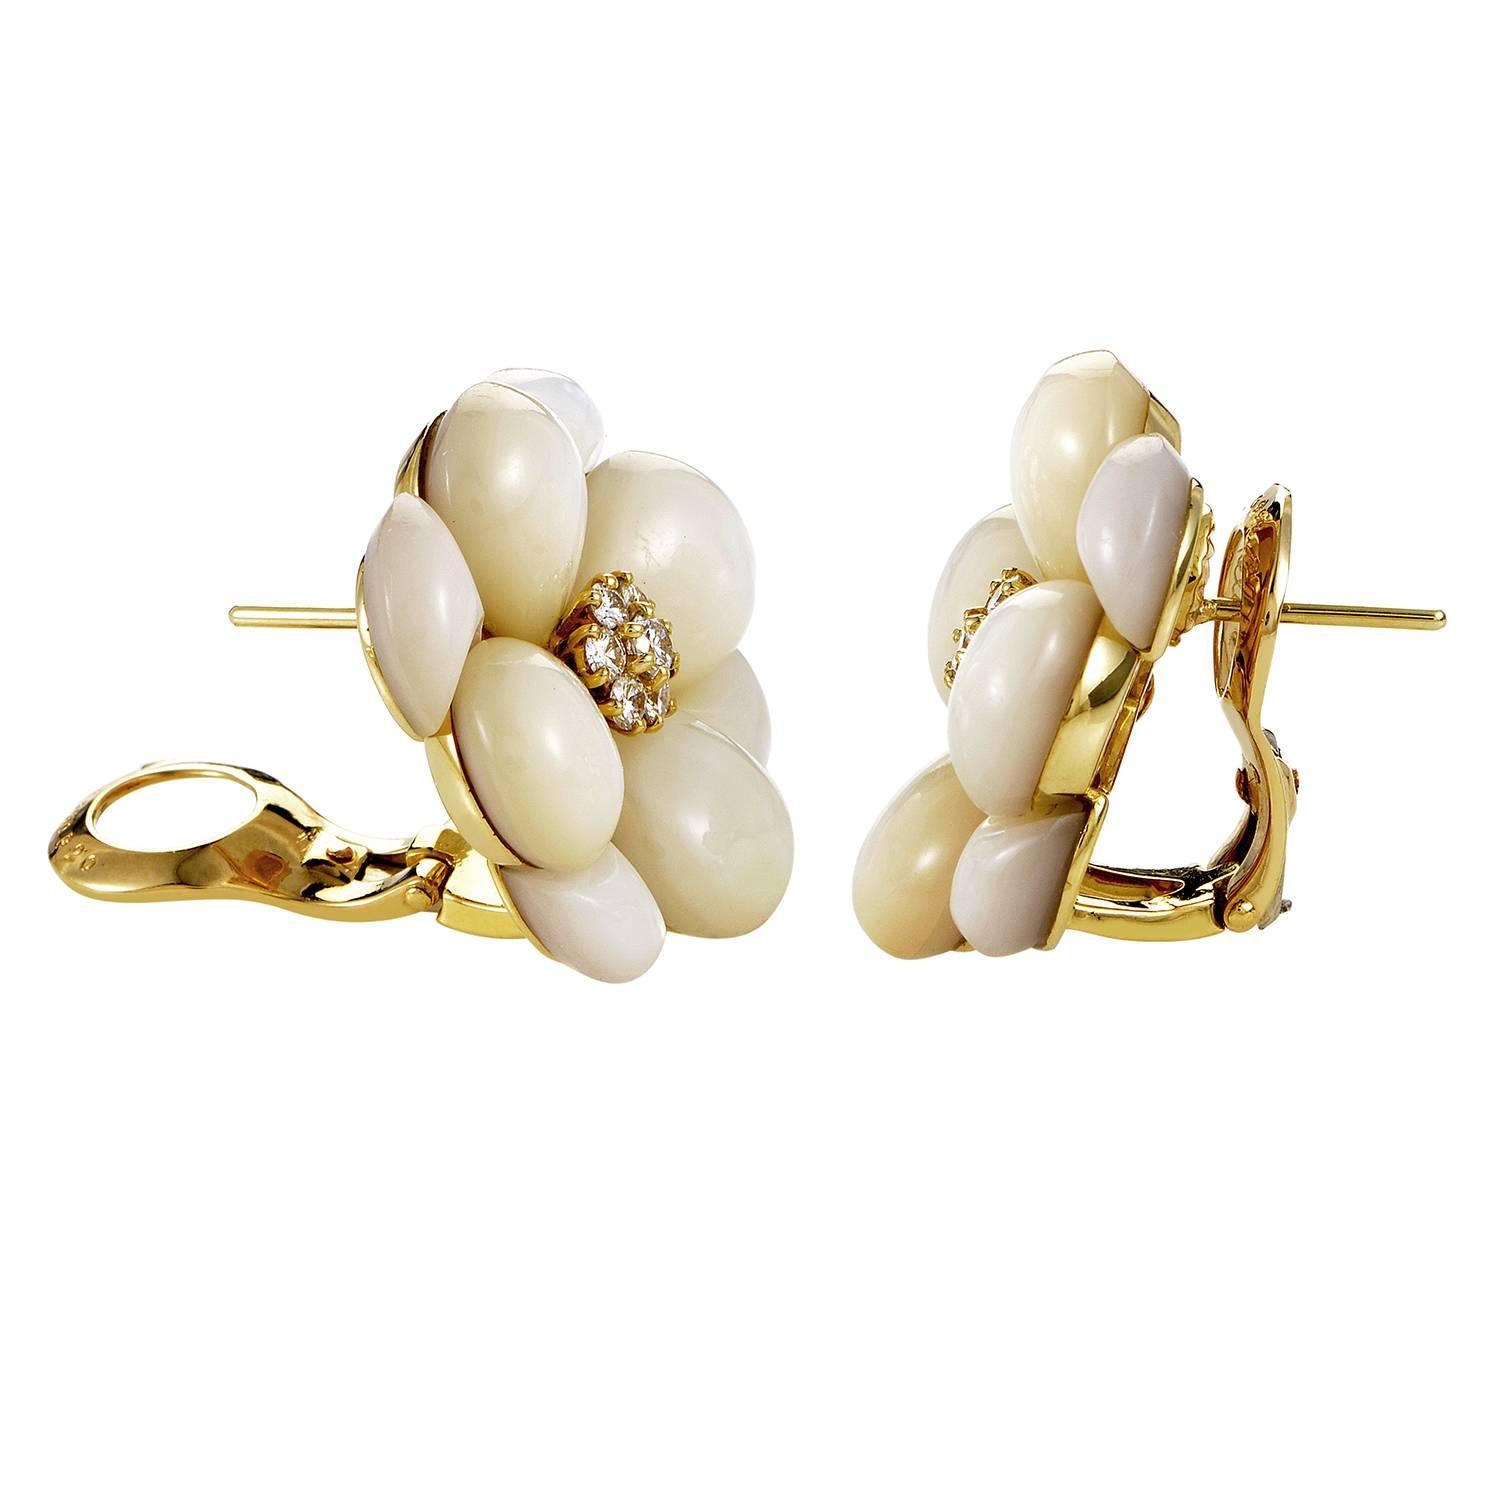 Van Cleef & Arpels utilizes the motif of blooming flowers in many of their gorgeous designs. This decadent pair of earrings from the French jeweler are made of 18K yellow gold and boasts exquisite, white mother of pearl petals. Lastly, .50ct of